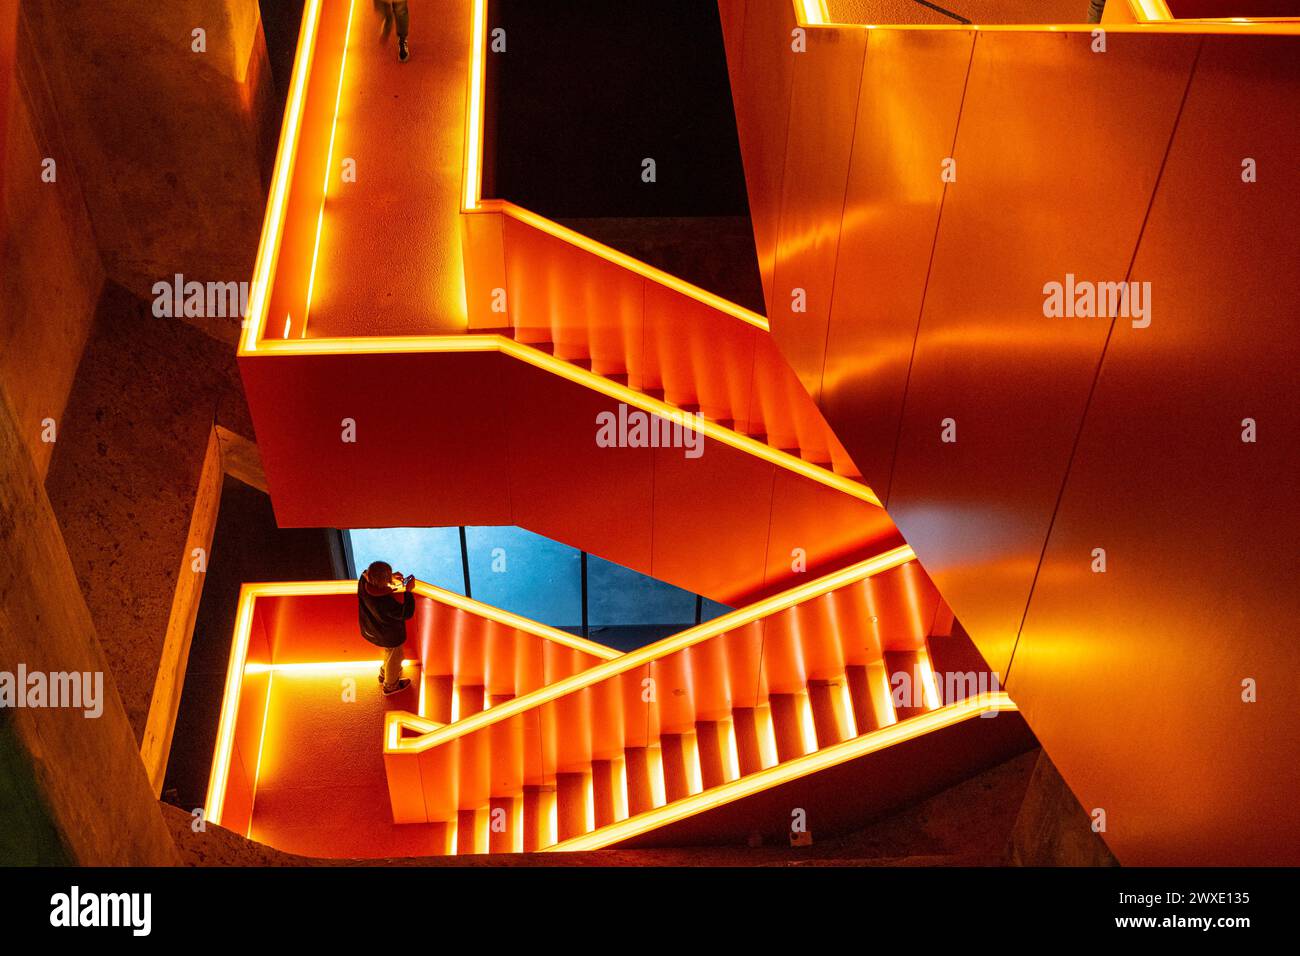 The orange illuminated staircase at Zeche Zollverein industrial monument and Ruhrmuseum, interior, Ruhr Area, Essen, Germany Stock Photo